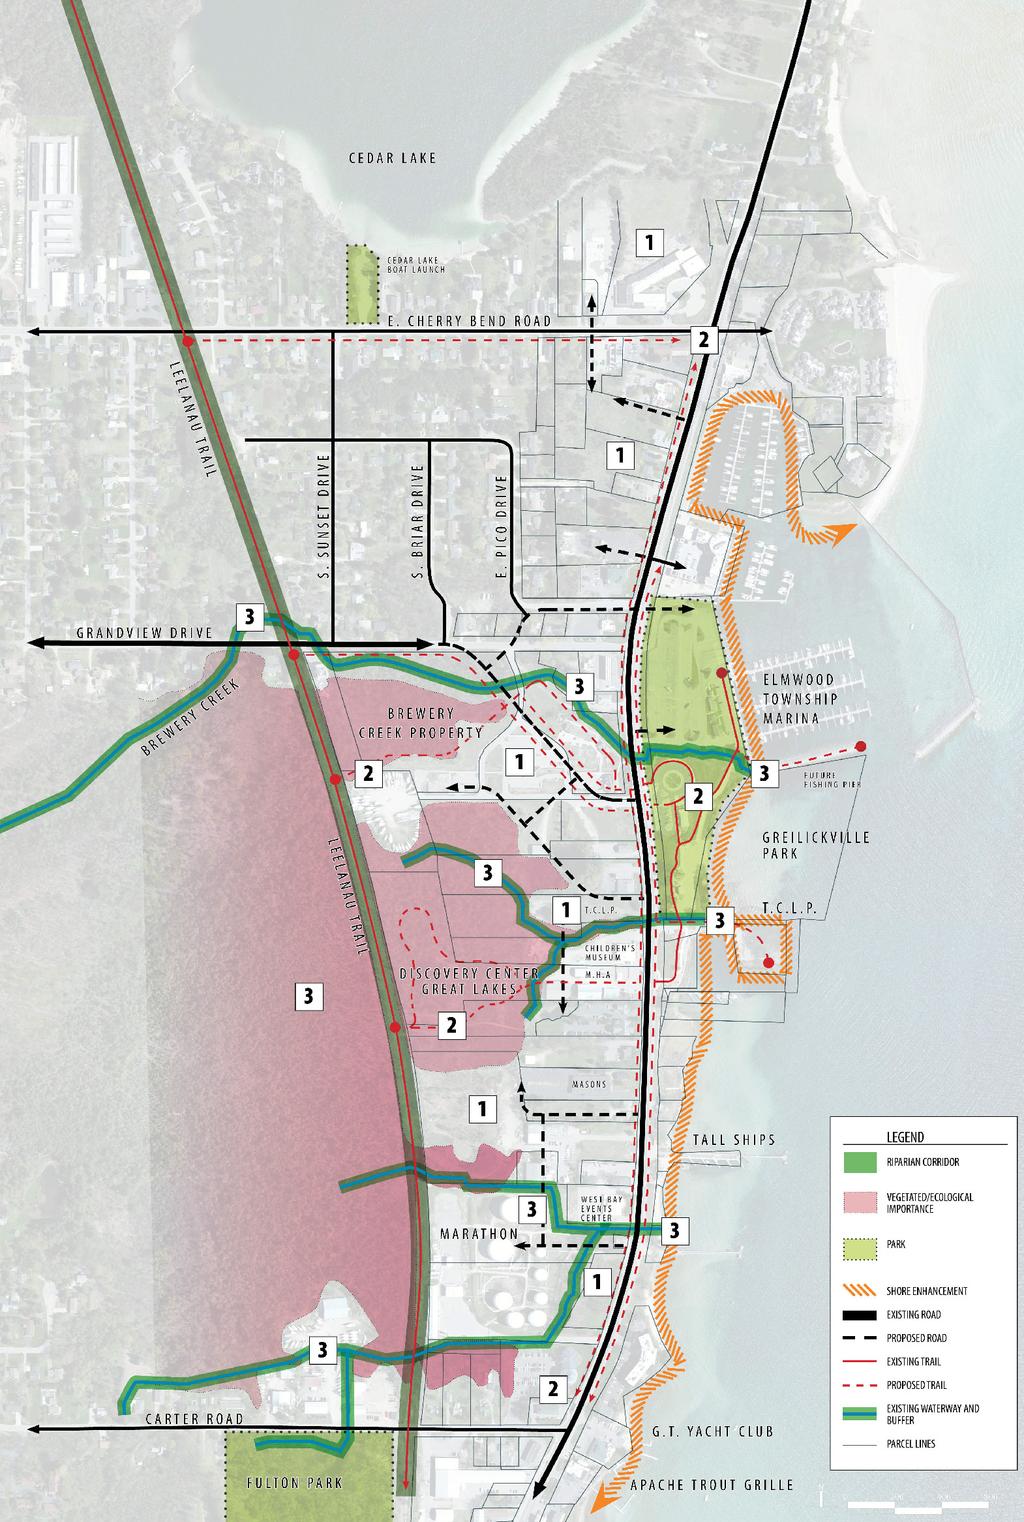 waterfront commercial corridor Adopted site planning principles that